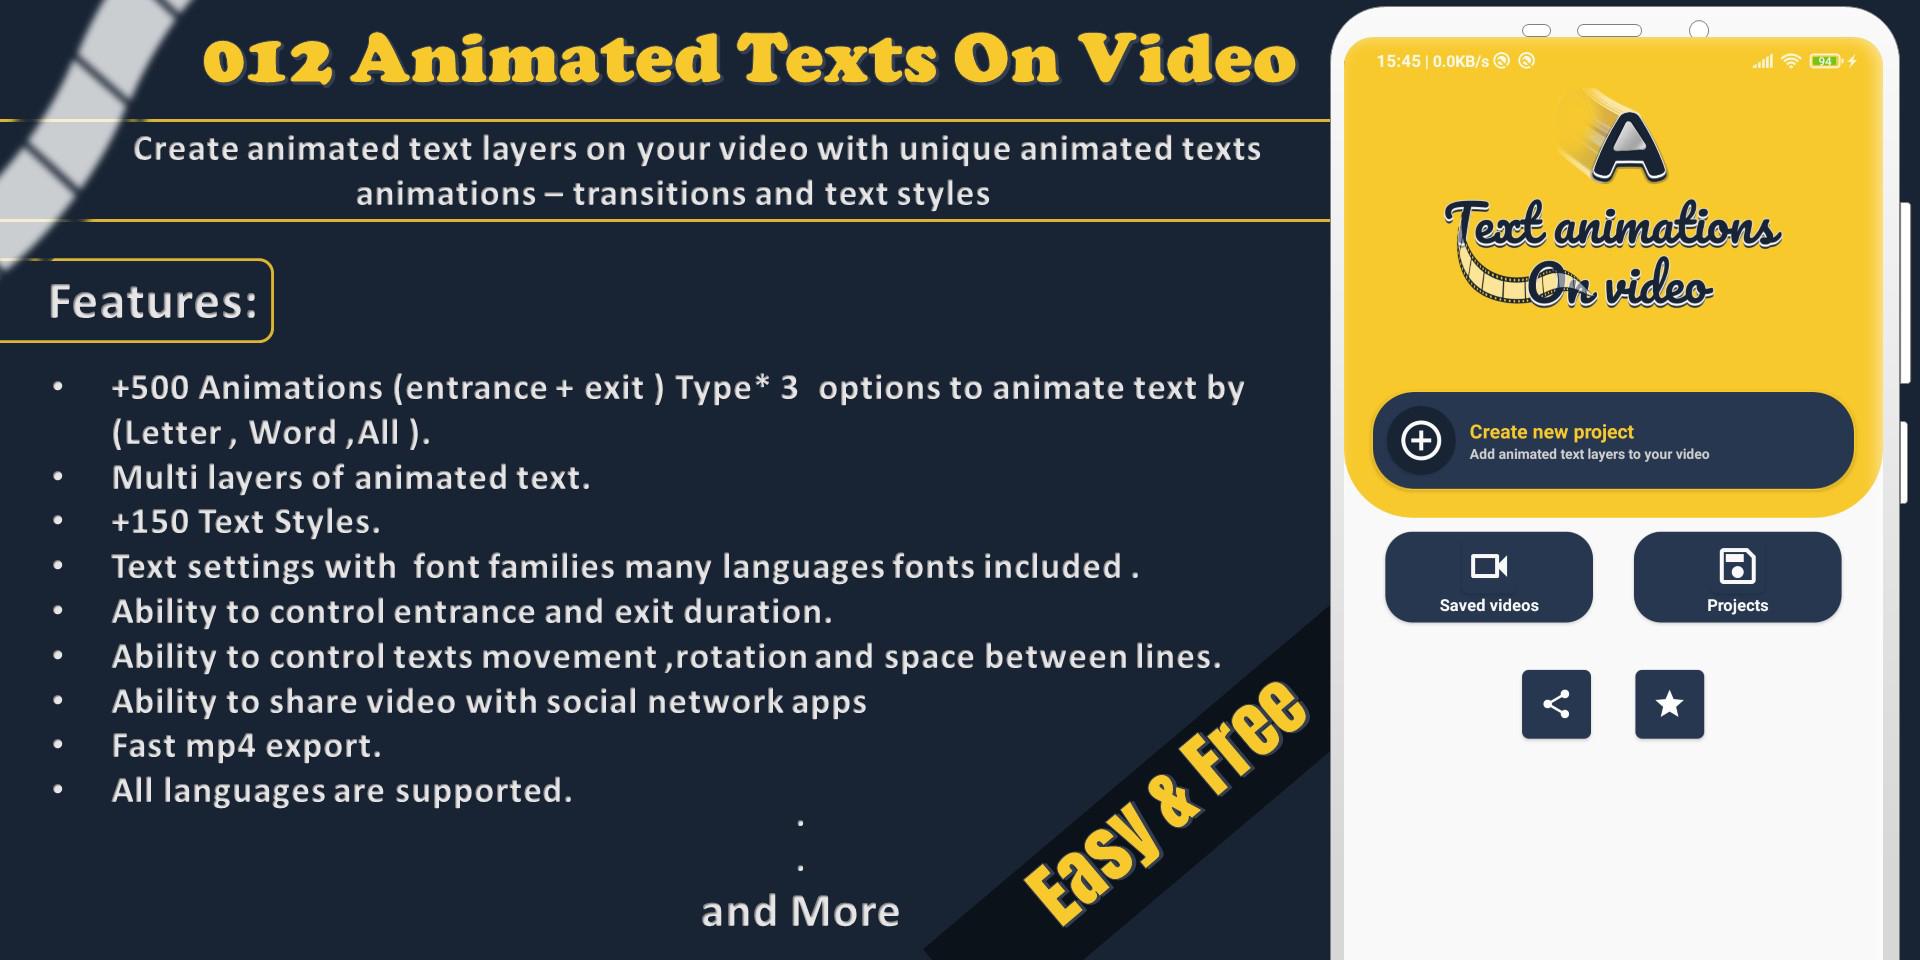 012 Animated text on video : 0 APK for Android Download